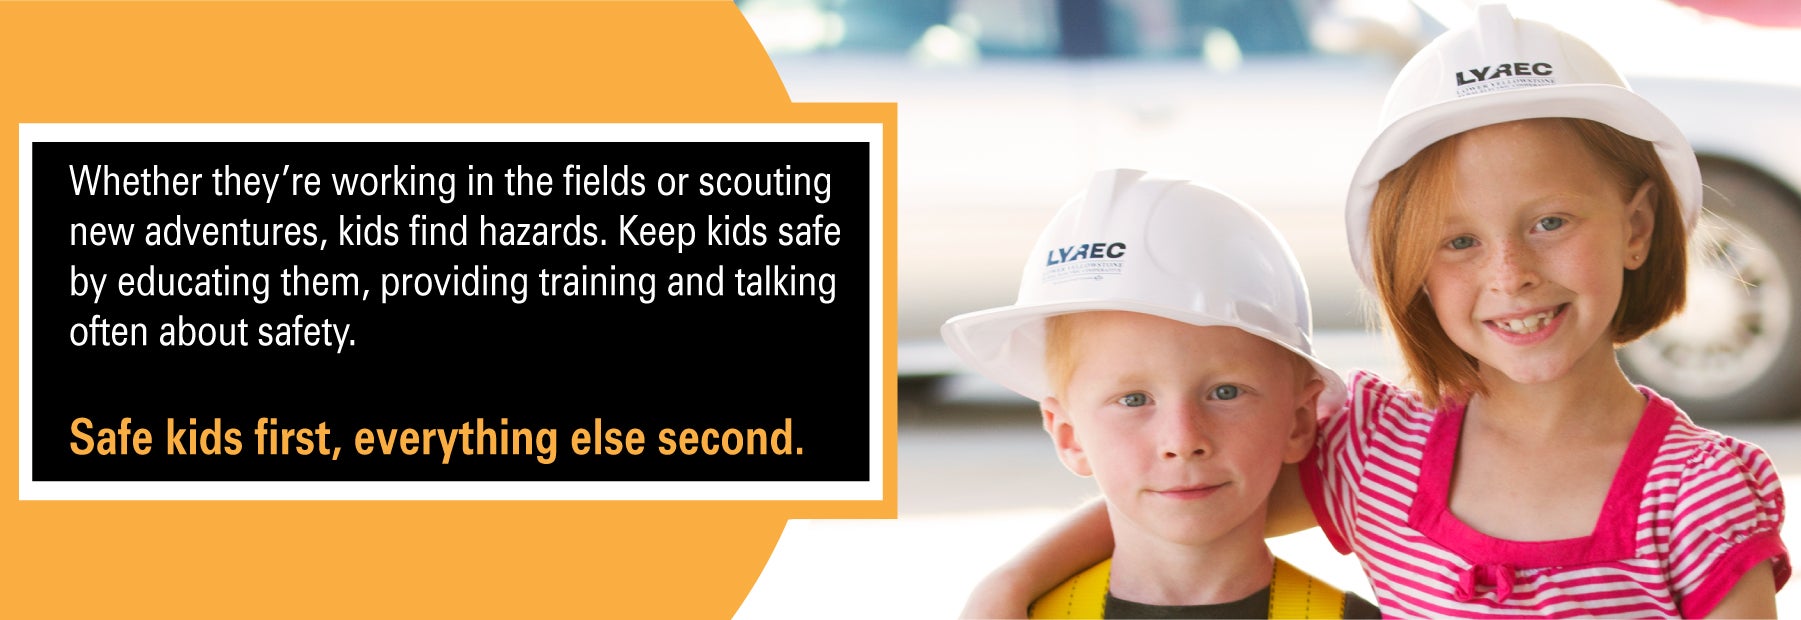 Safety and Kids